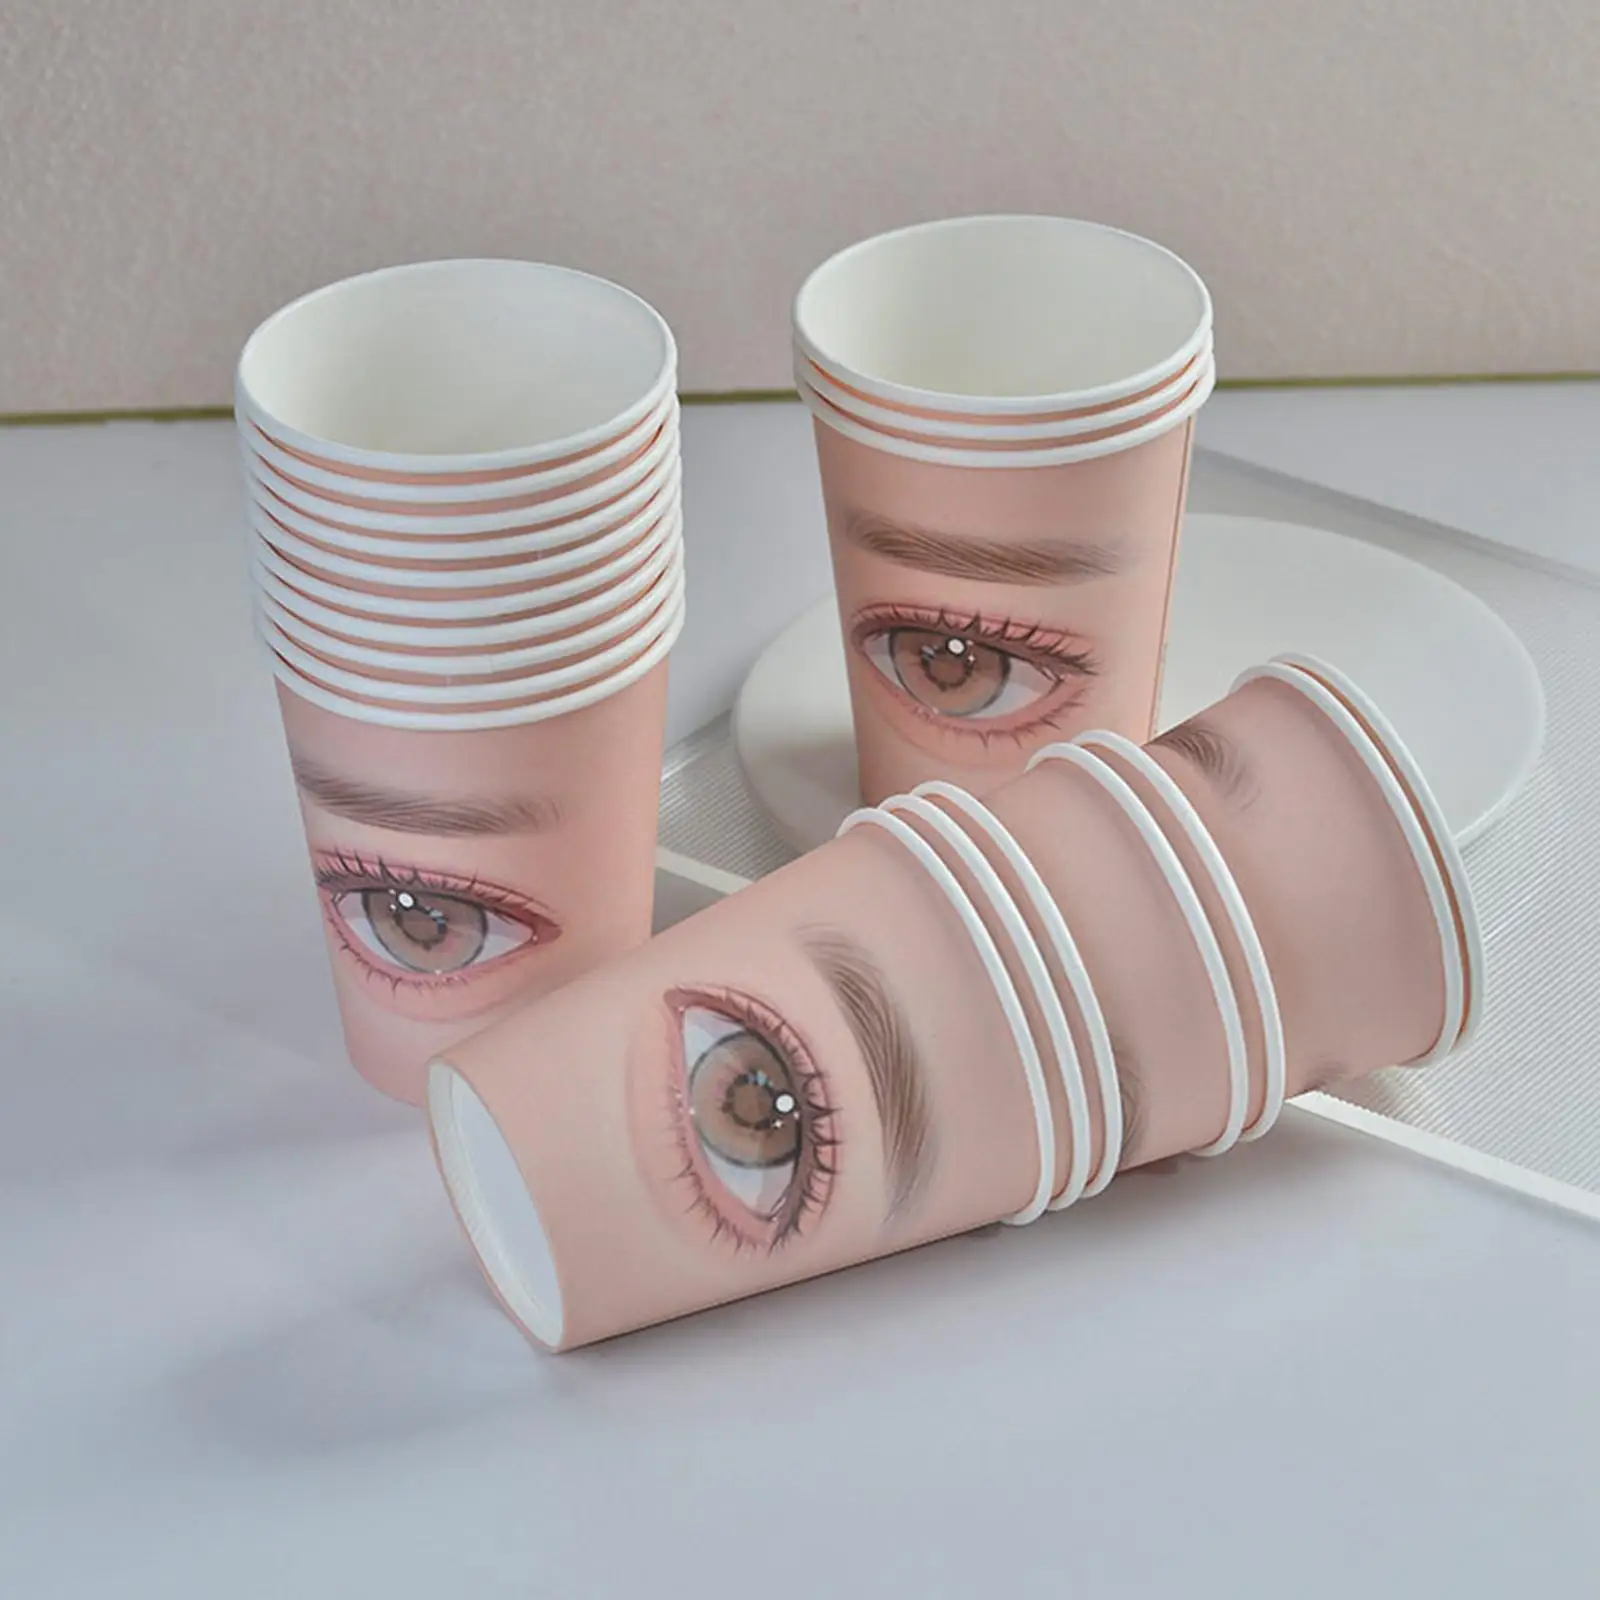 20 Pieces Eyelash Practice Paper Cup Exercises Upgraded Cosmetology Multifunction Makeup for Starters Teaching Aid Training Tool